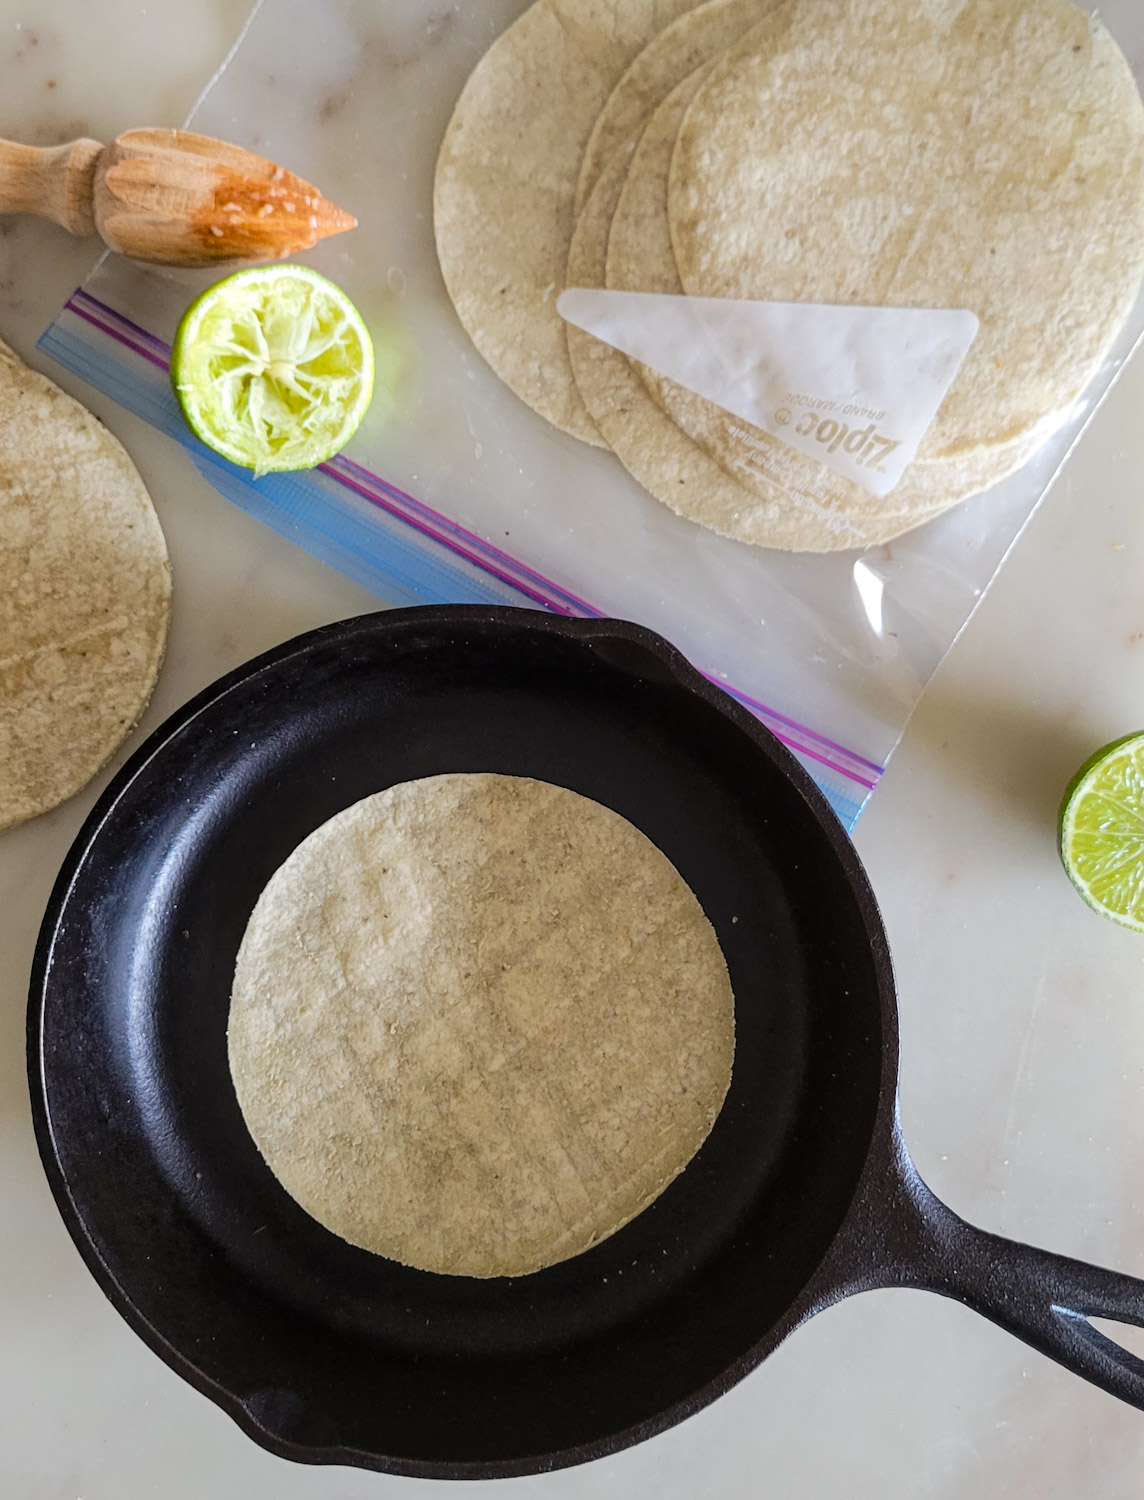 cast iron pan with a corn tortilla, and a freezer bag of heated tortillas steaming inside to stay pliable.